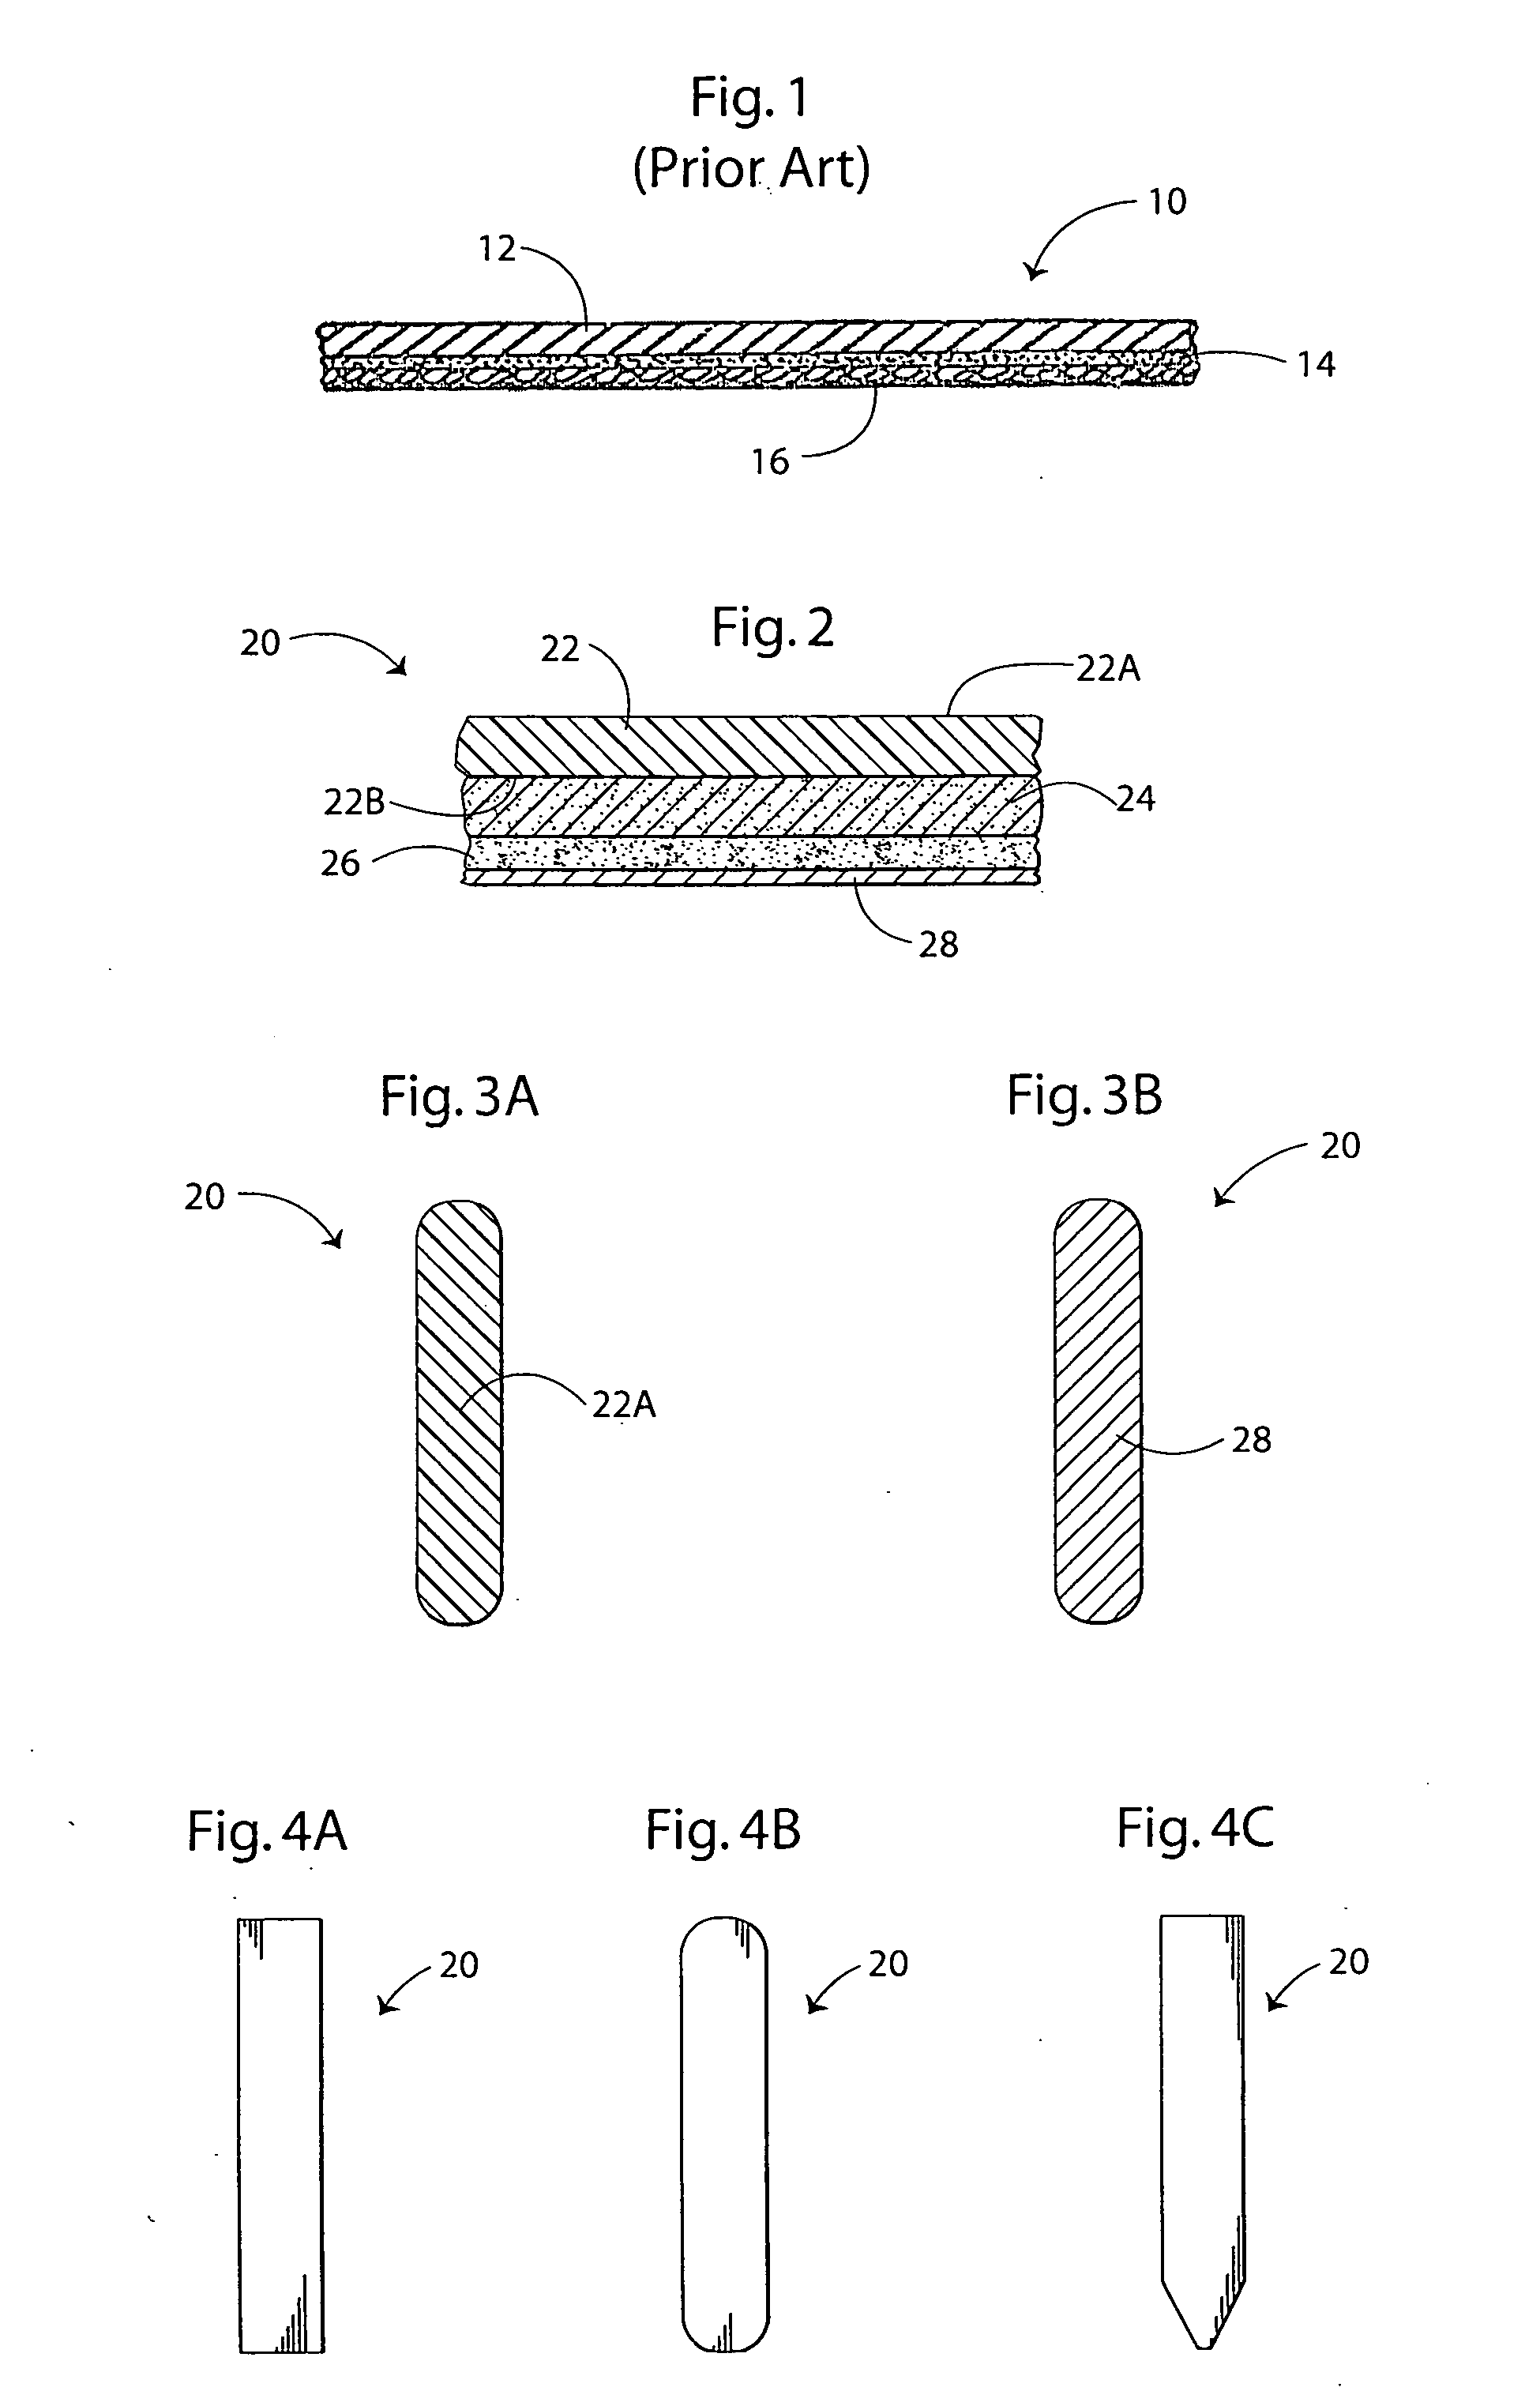 Collar stiffening device and method of use